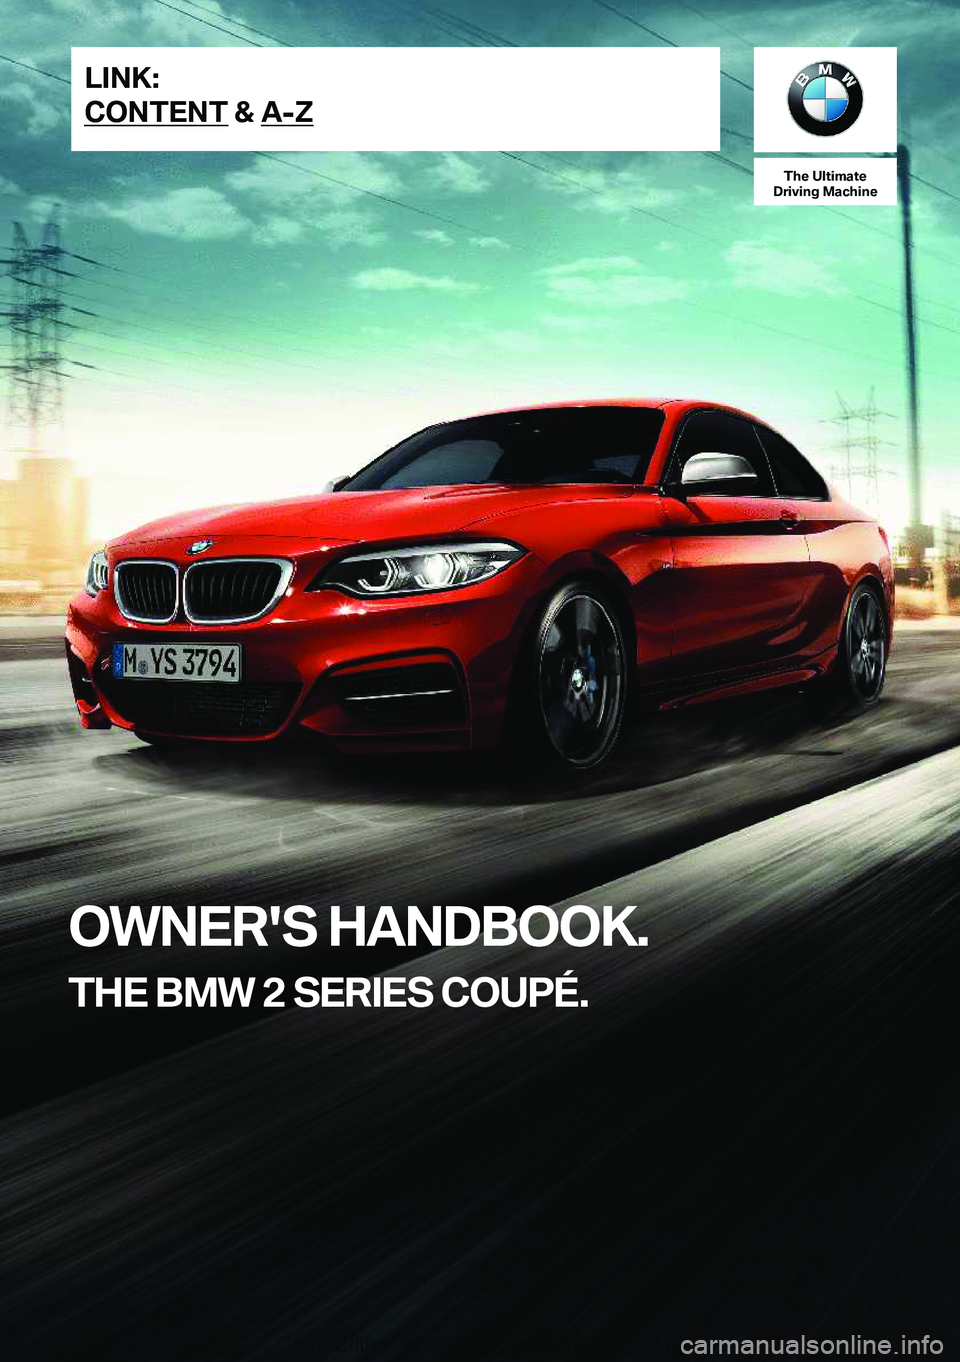 BMW 2 SERIES COUPE 2020  Owners Manual �T�h�e��U�l�t�i�m�a�t�e
�D�r�i�v�i�n�g��M�a�c�h�i�n�e
�O�W�N�E�R�'�S��H�A�N�D�B�O�O�K�.
�T�H�E��B�M�W��2��S�E�R�I�E�S��C�O�U�P�